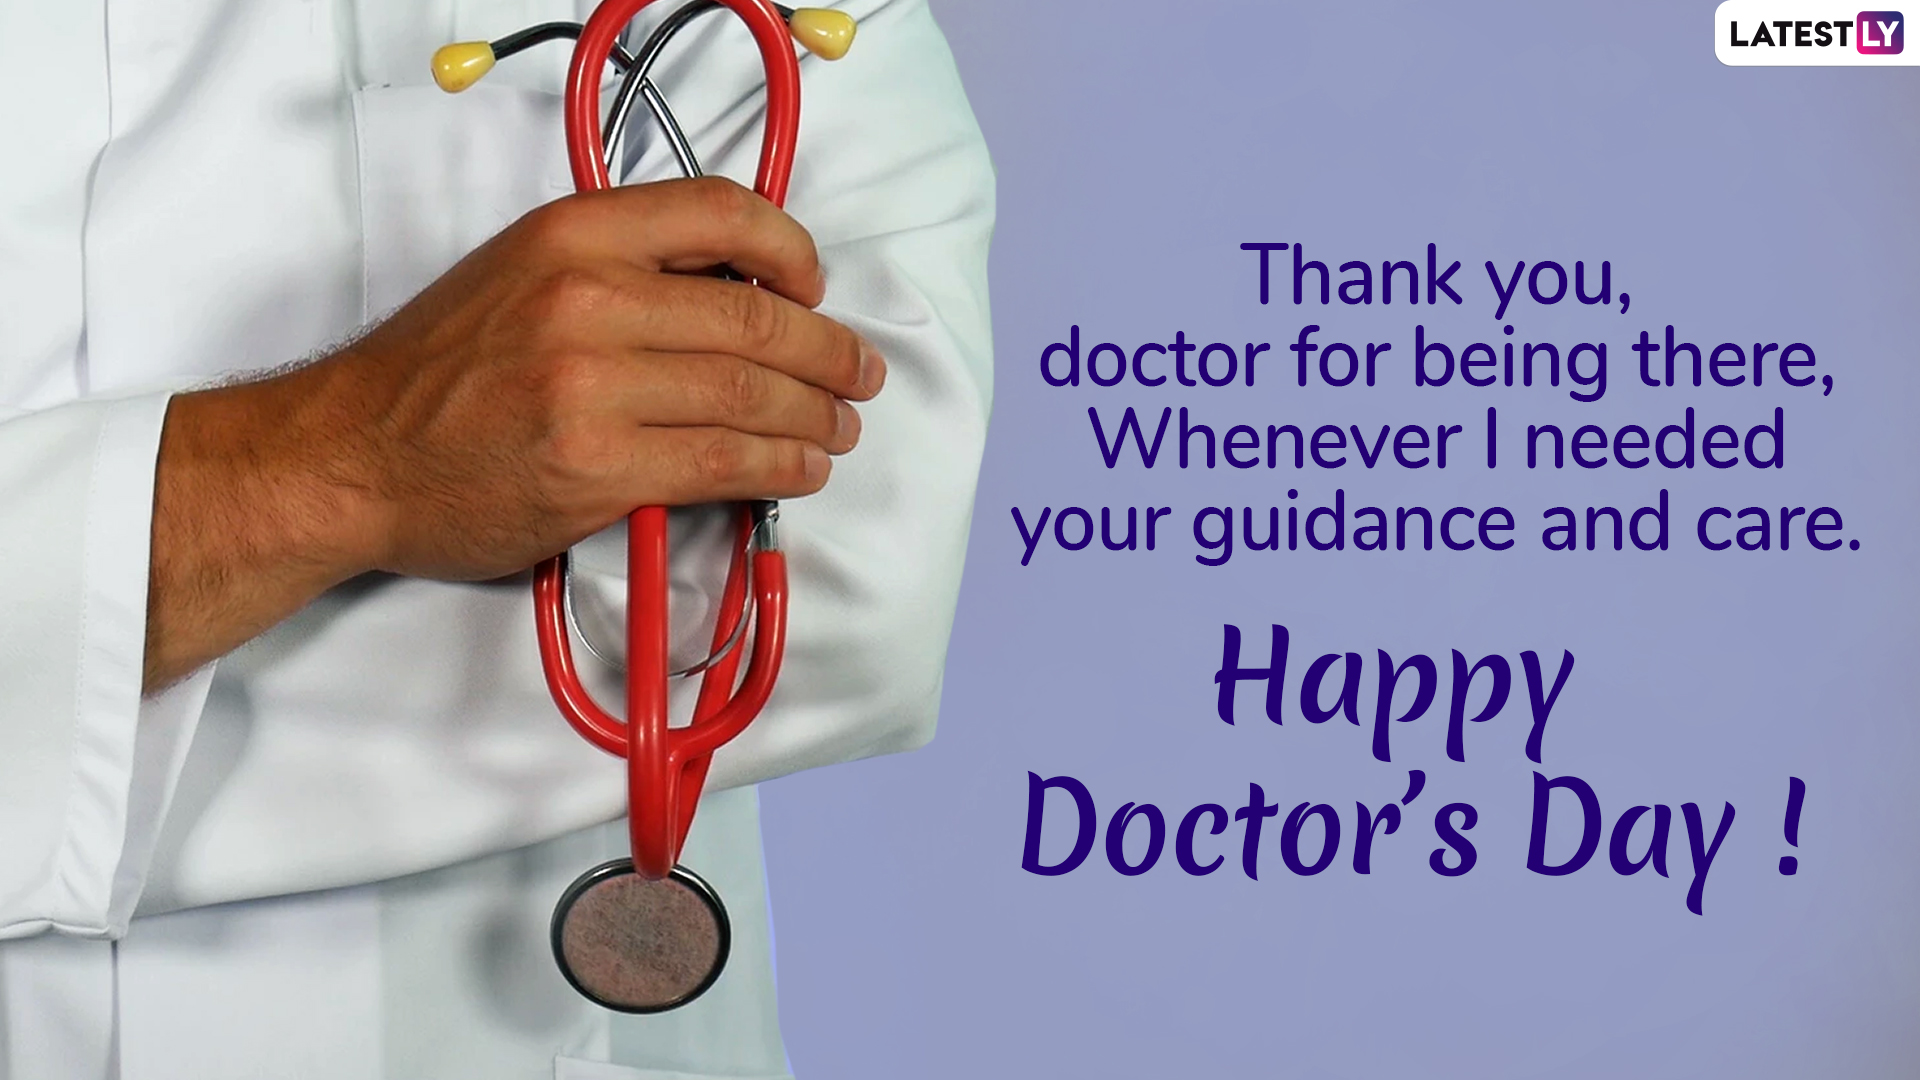 Happy Doctors Day Wishes Doctors Day Wishes Doctors Day Quotes Images